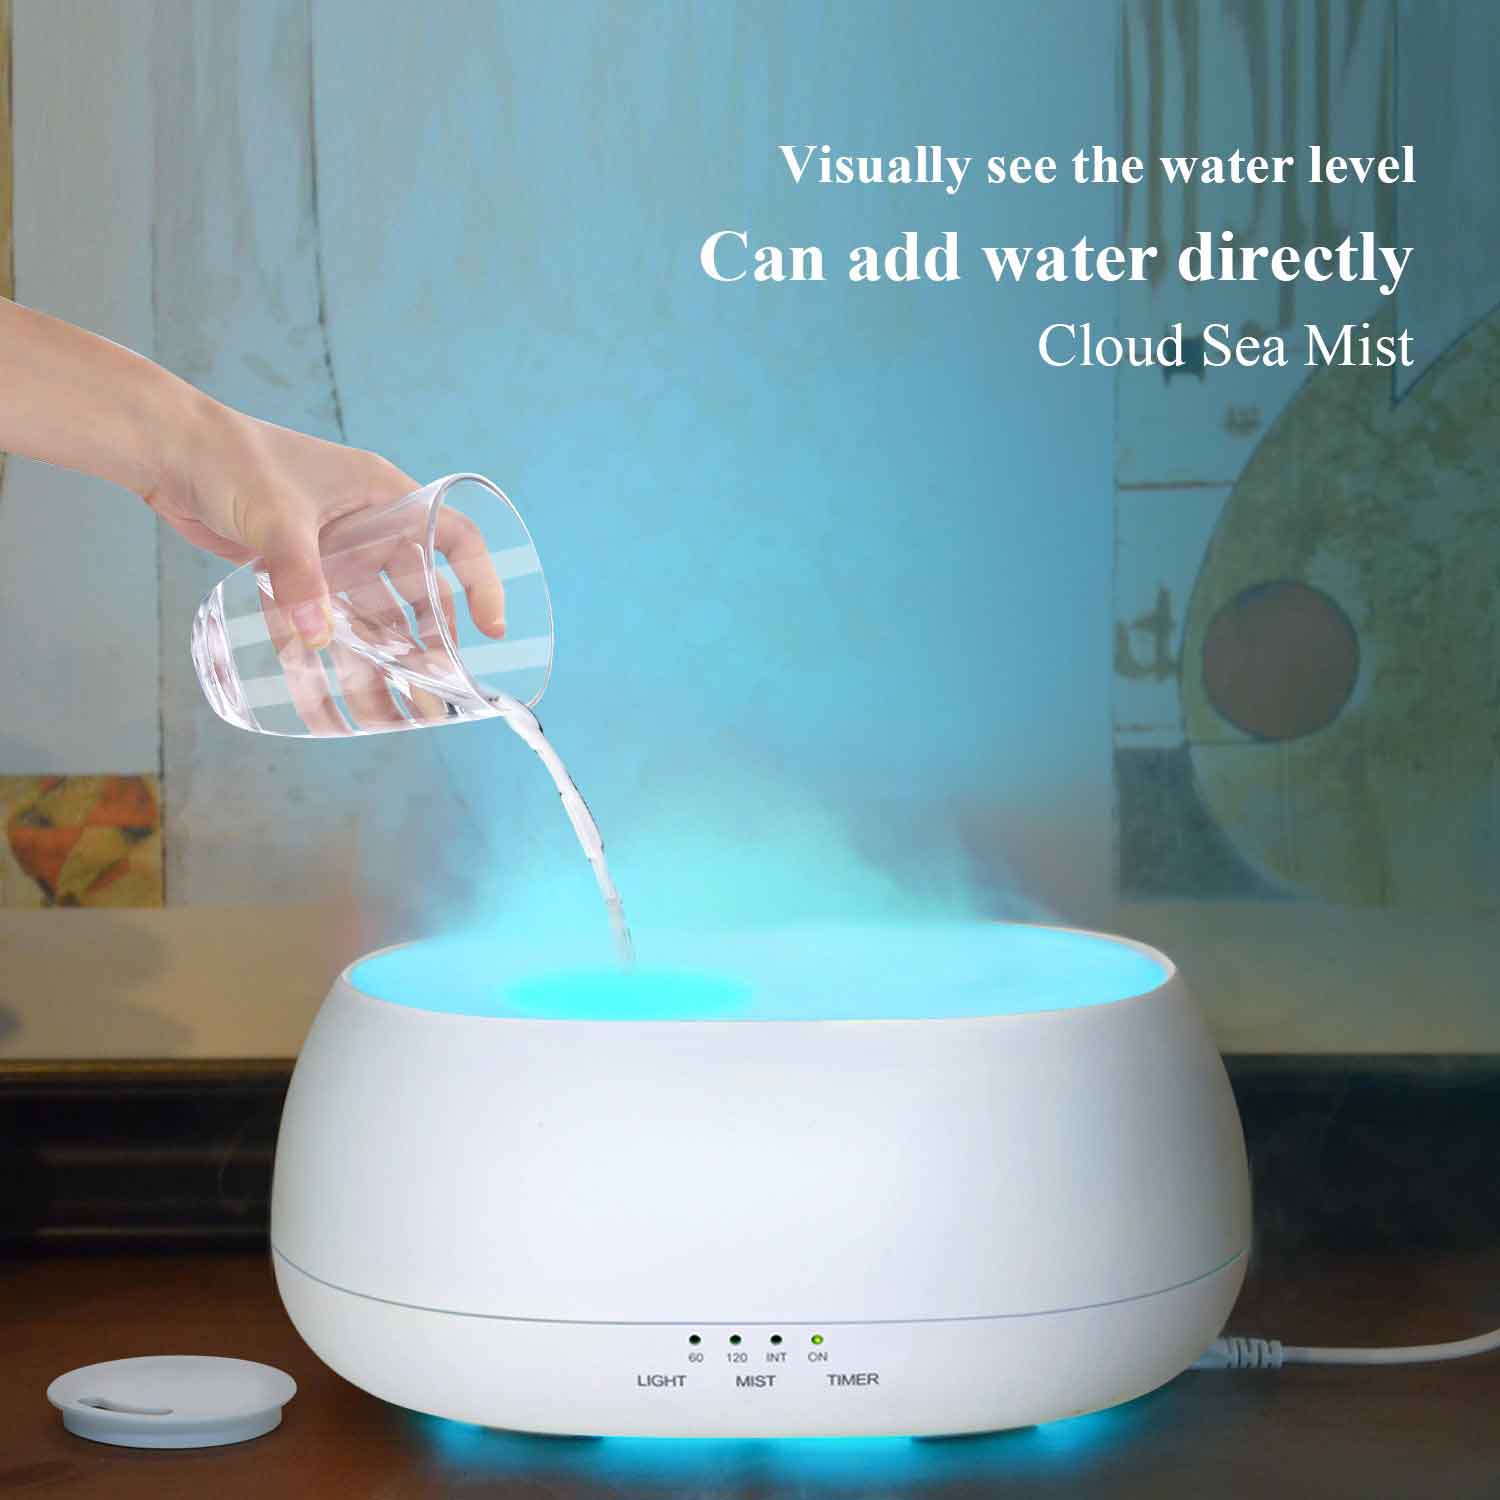 DN-817 Aroma Diffuser Air Humidifier With Remote Control - White